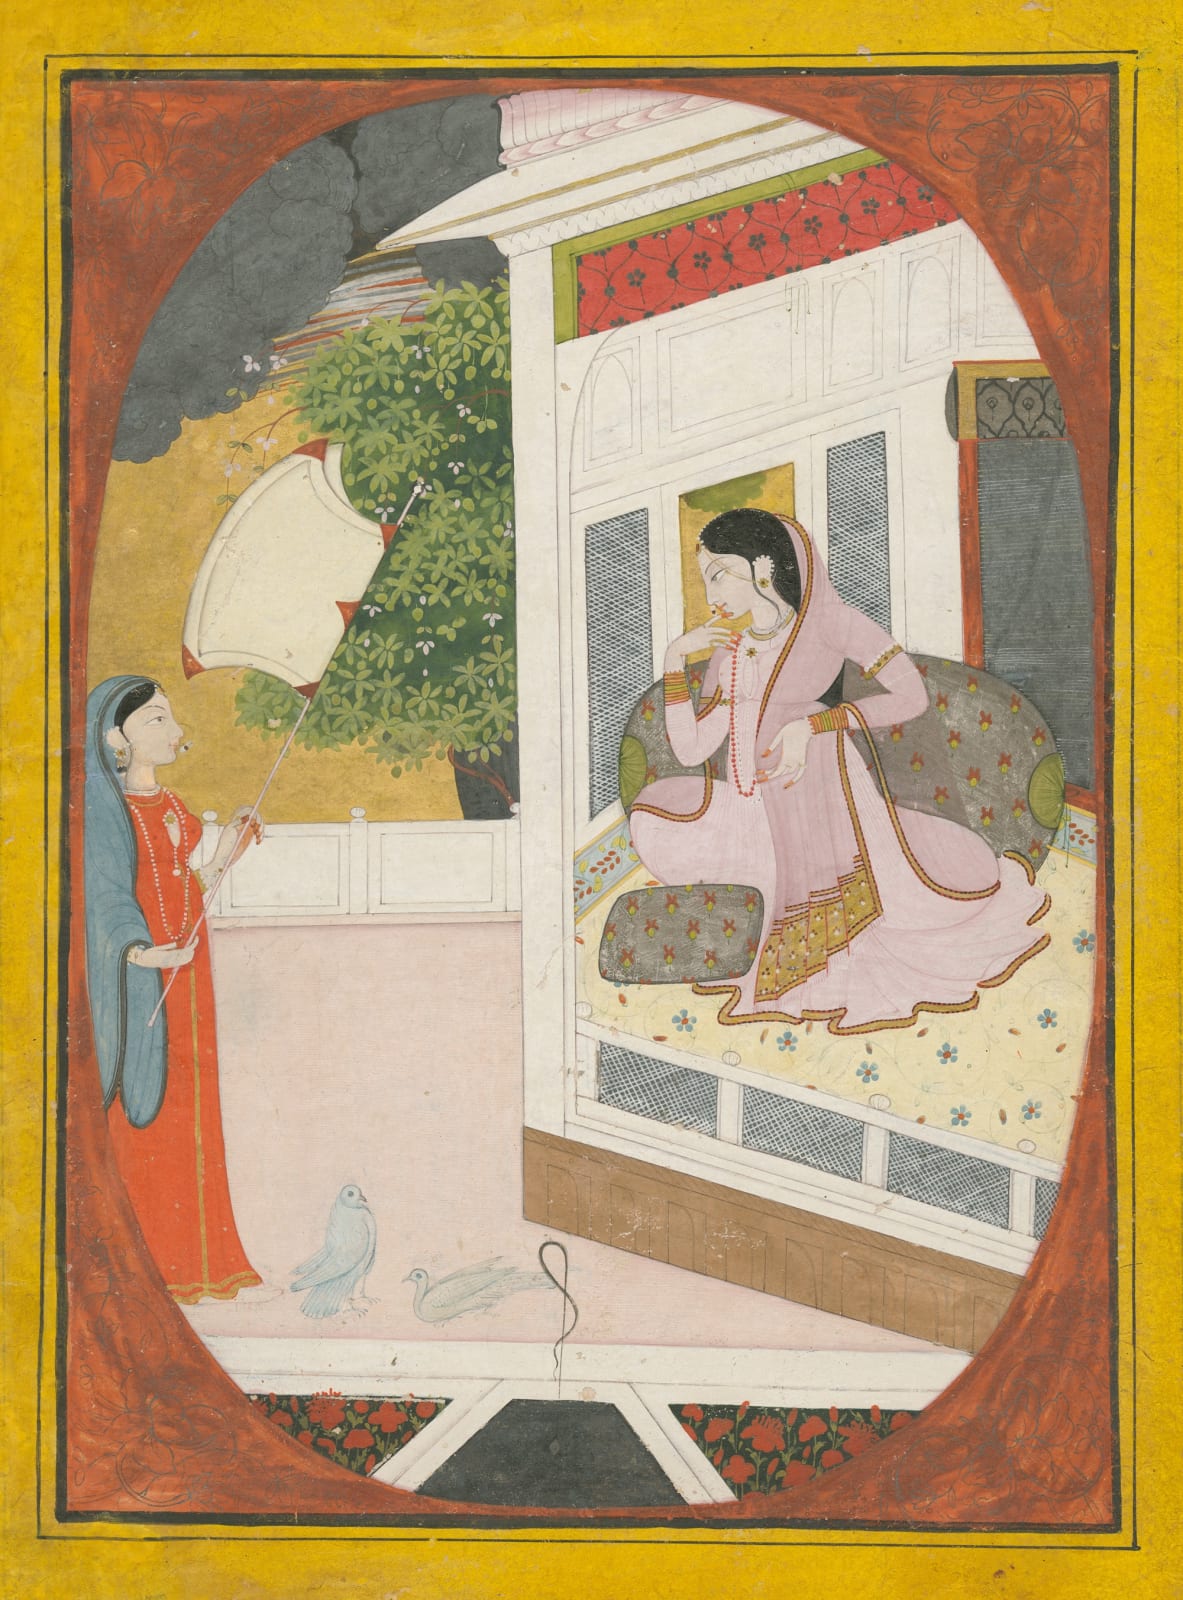 A Lady musing on her absent Lover, Garhwal, c. 1780-90